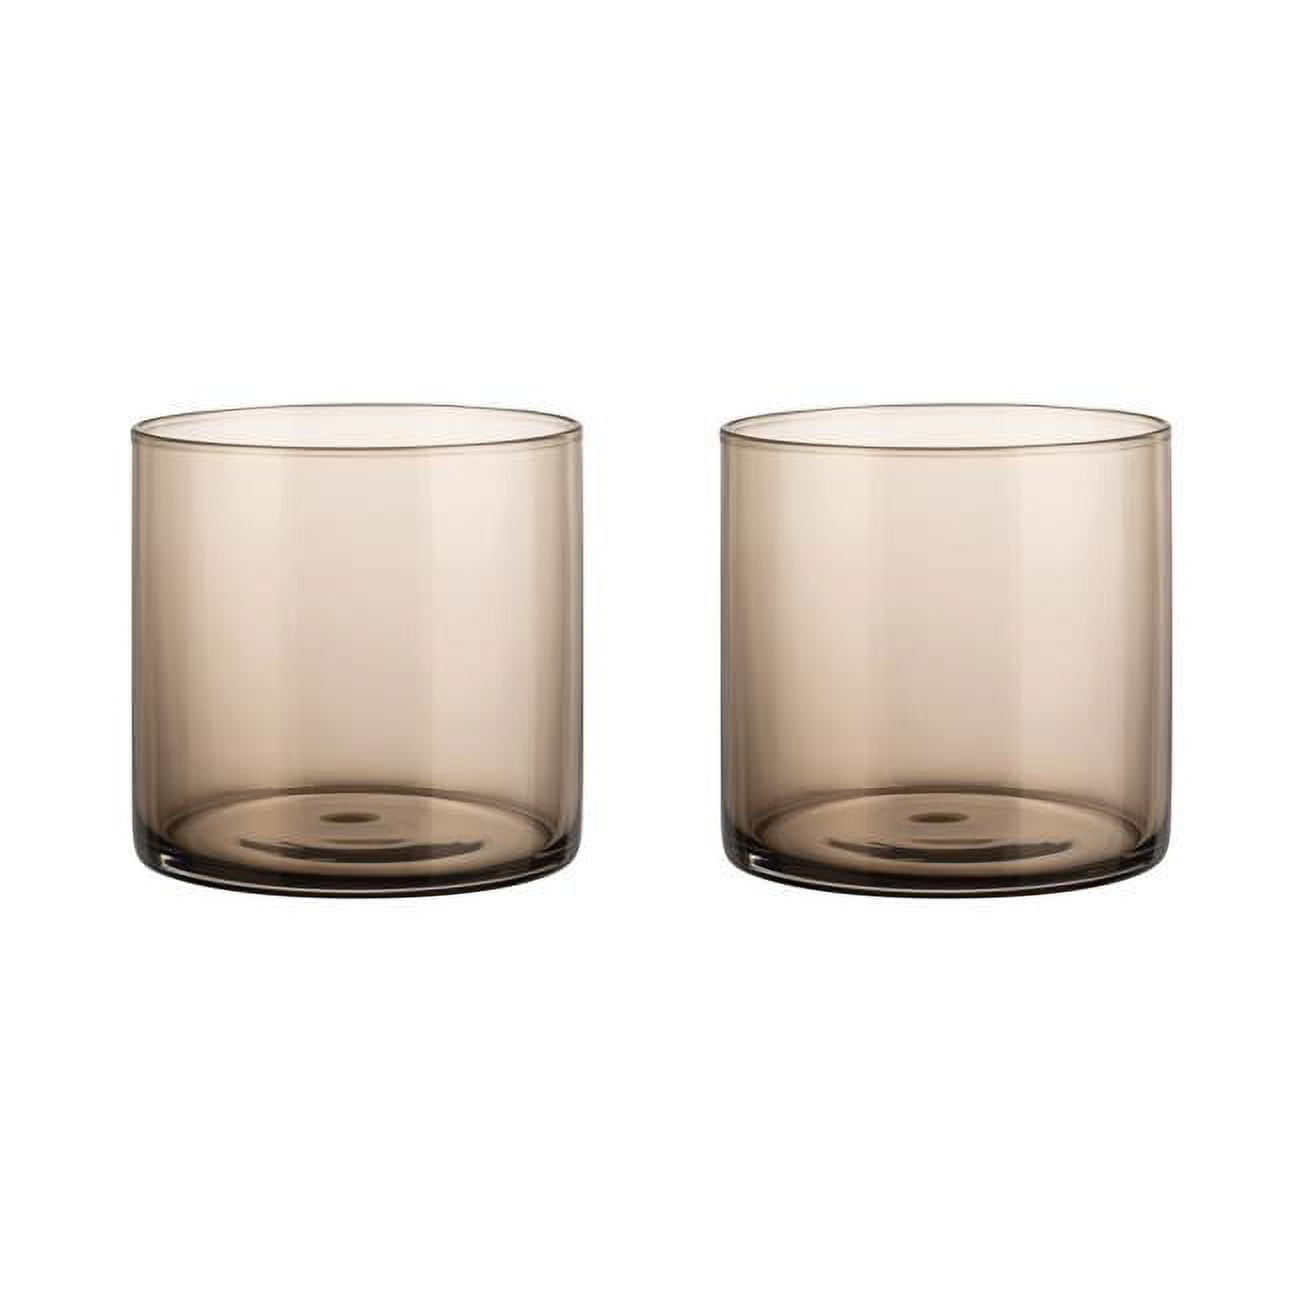 Picture of Blomus 64285 7 oz Mera Low Ball Drinking Glasses, Coffee - Set of 2